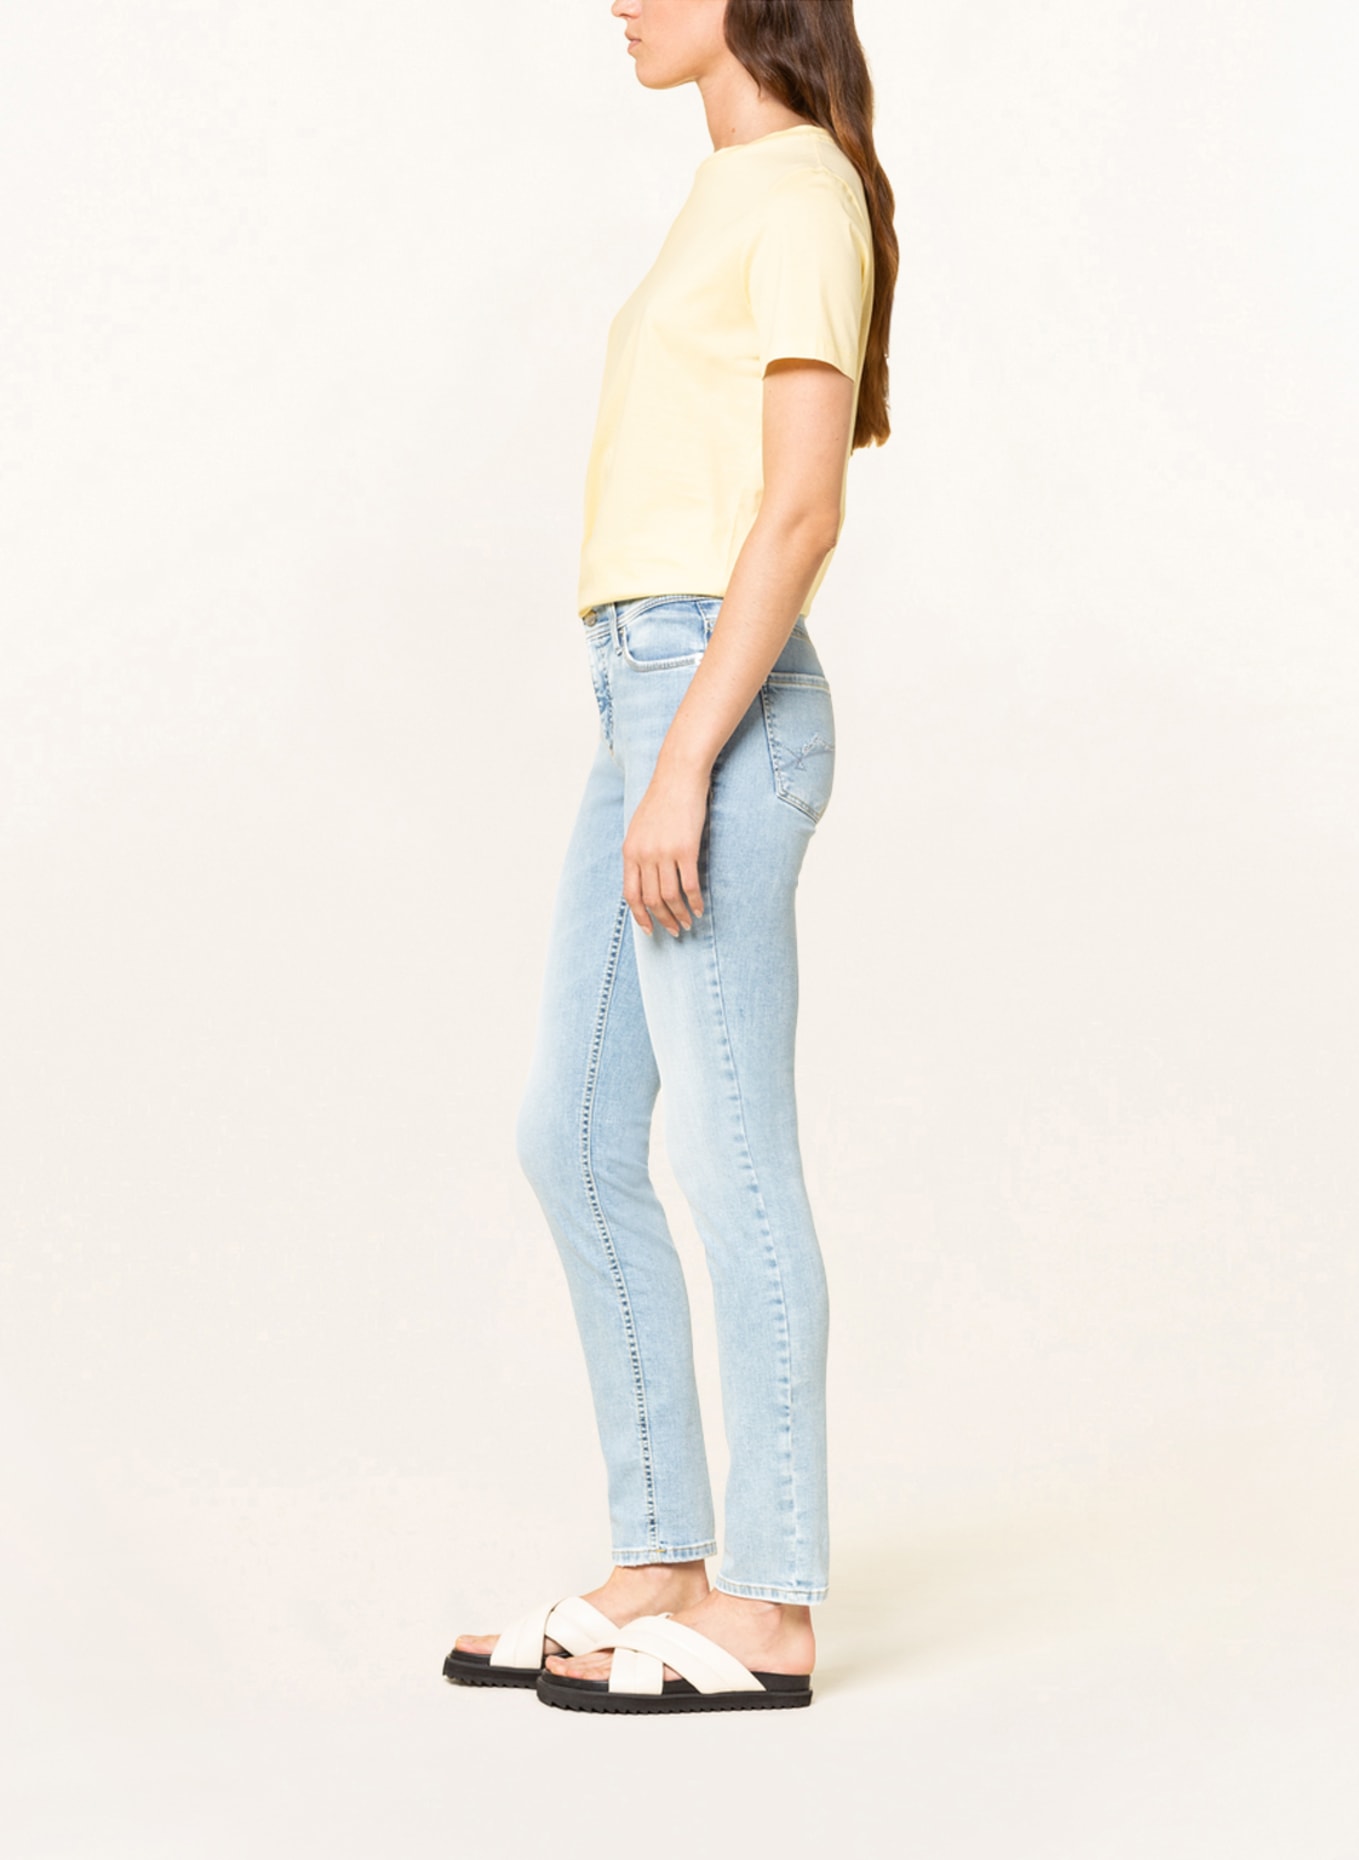 CAMBIO Skinny jeans PARLA, Color: 5325 summer contrast (Image 4)